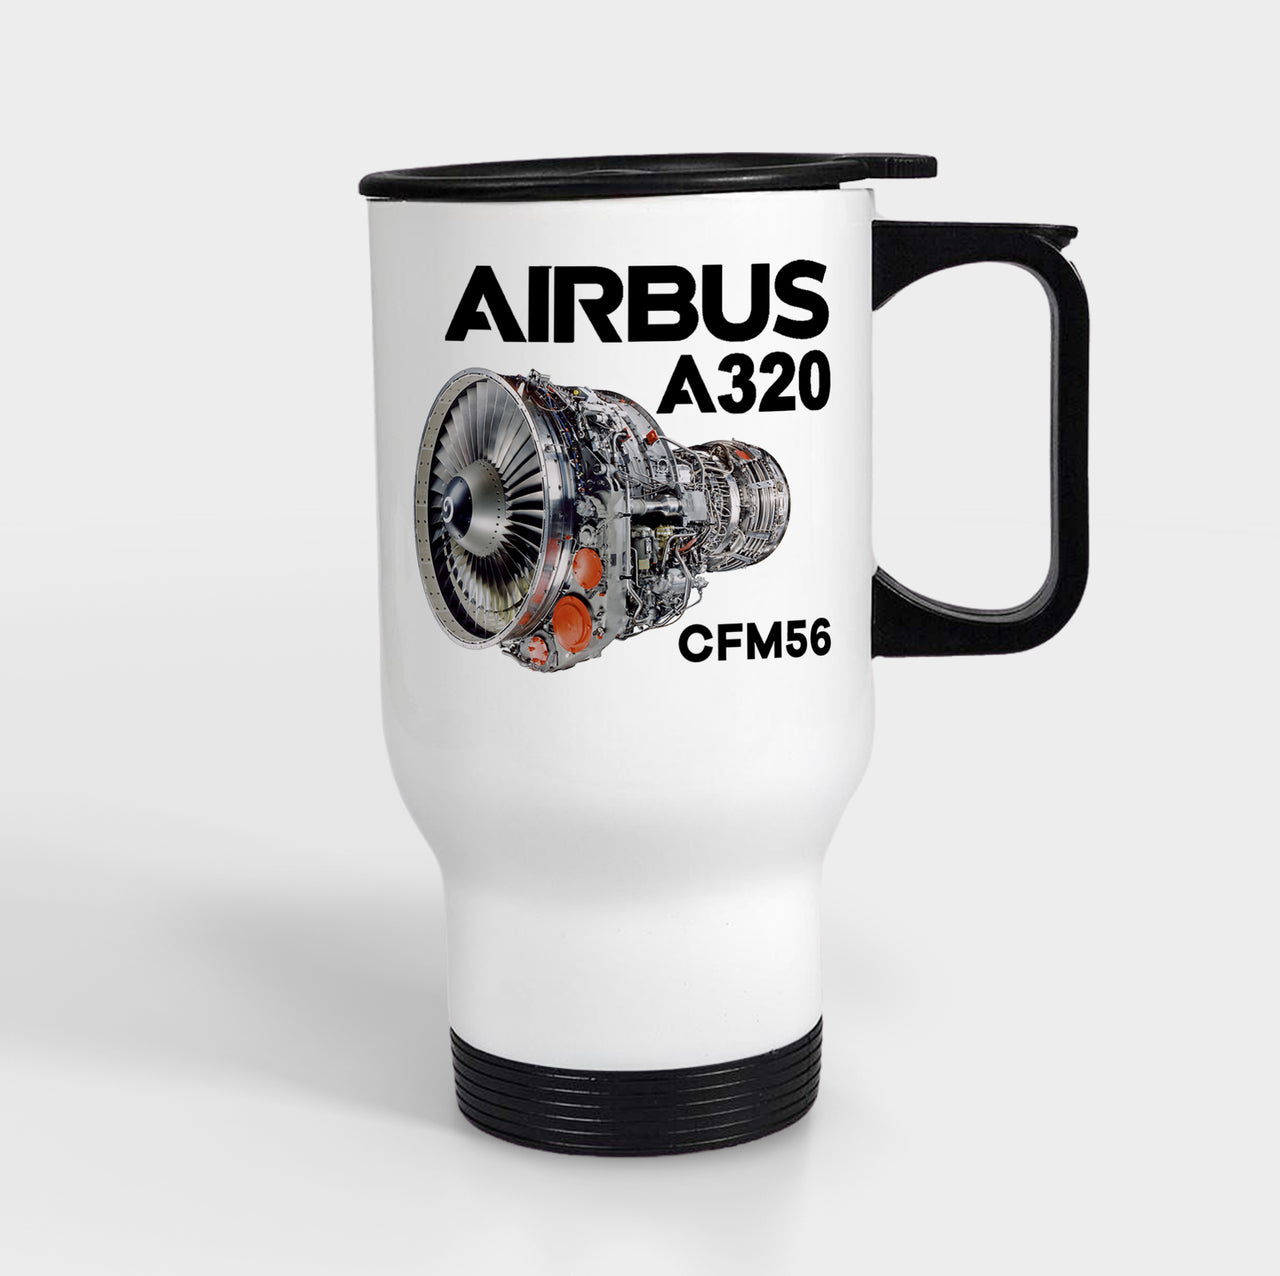 Airbus A320 & CFM56 Engine Designed Travel Mugs (With Holder)